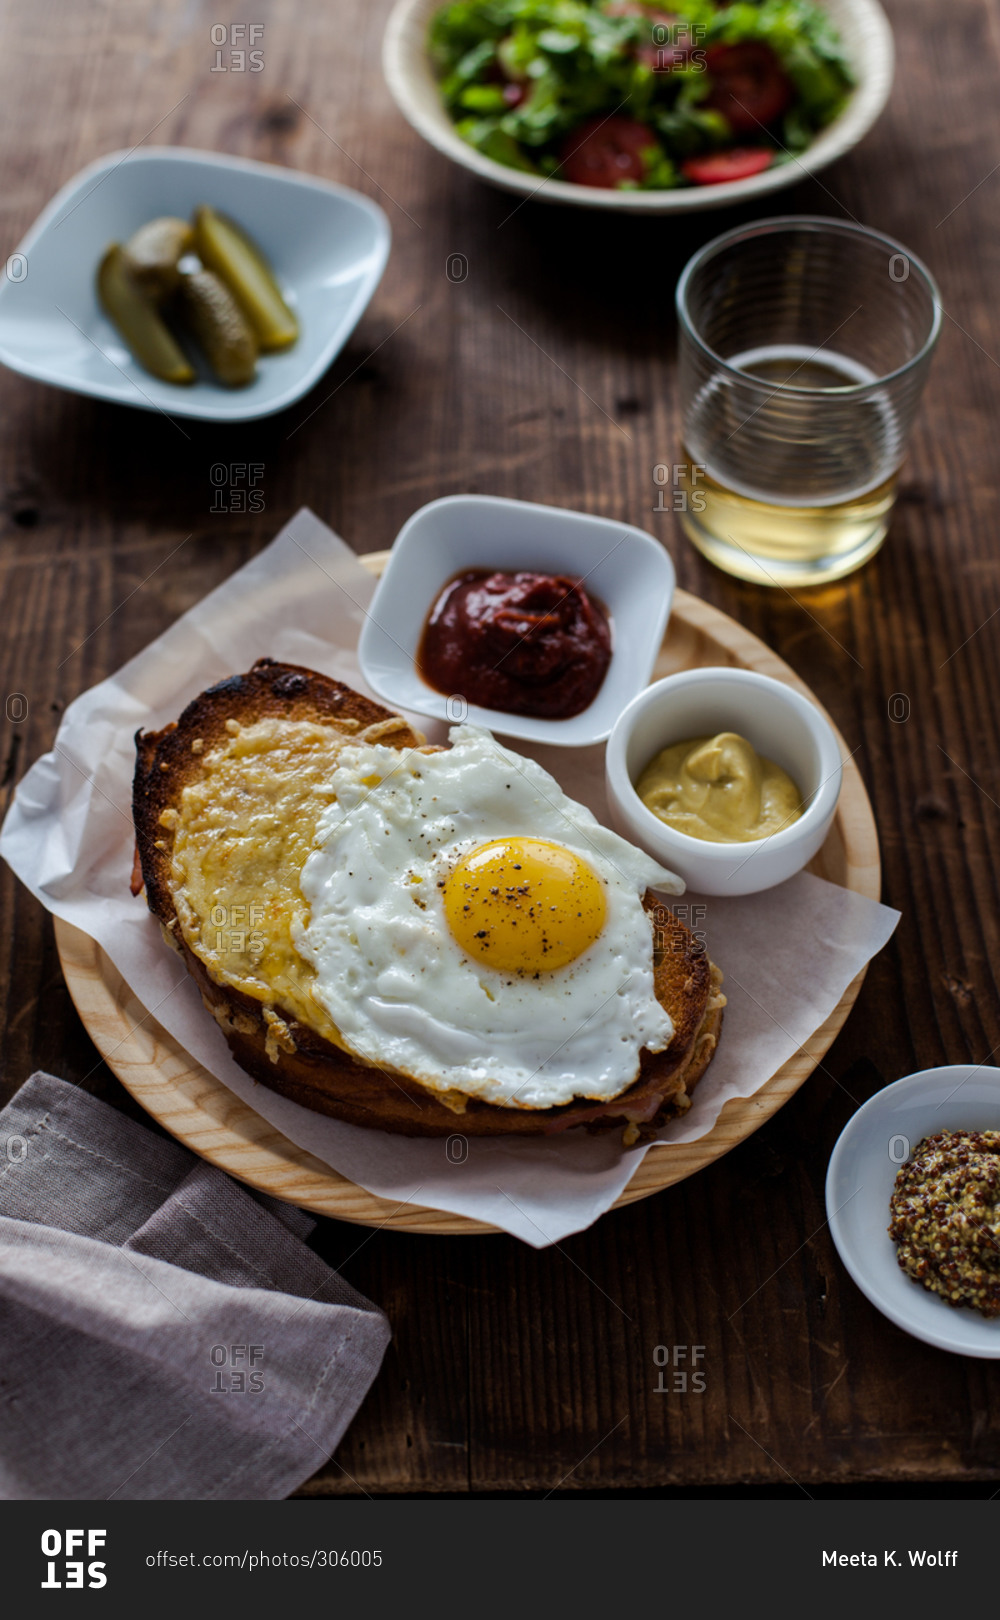 Croque monsieur with an egg stock photo OFFSET